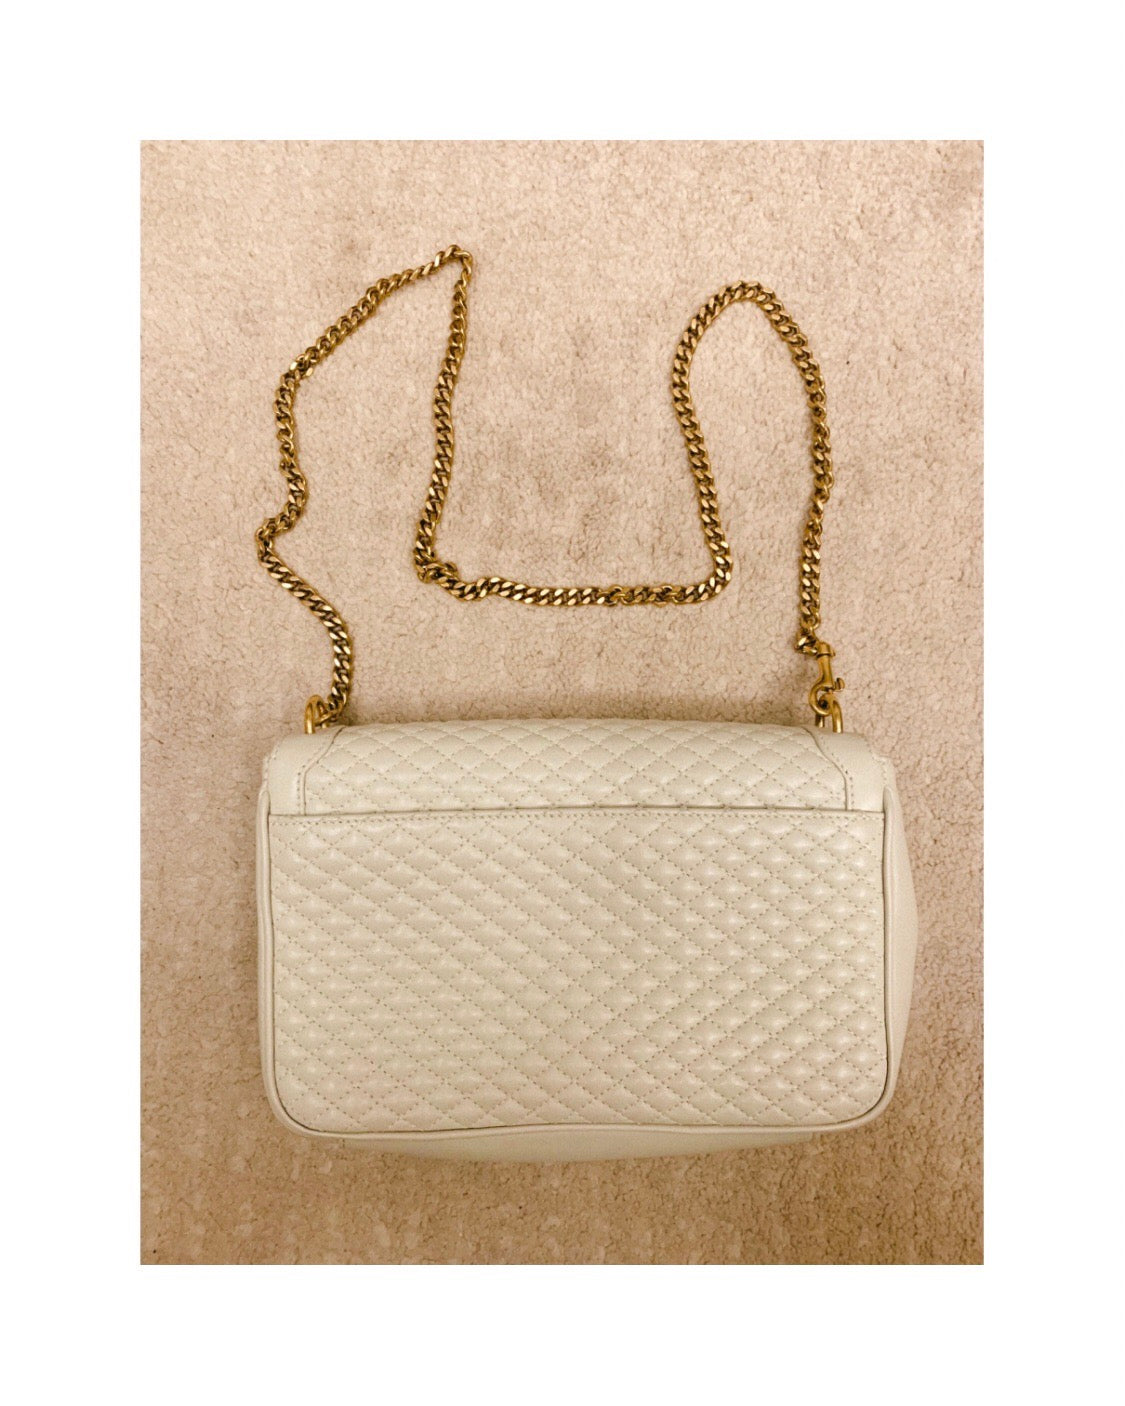 YSL Victorie Chain Bag in Quilted Lambskin 白色羊皮鍊條包 - STAY PURE